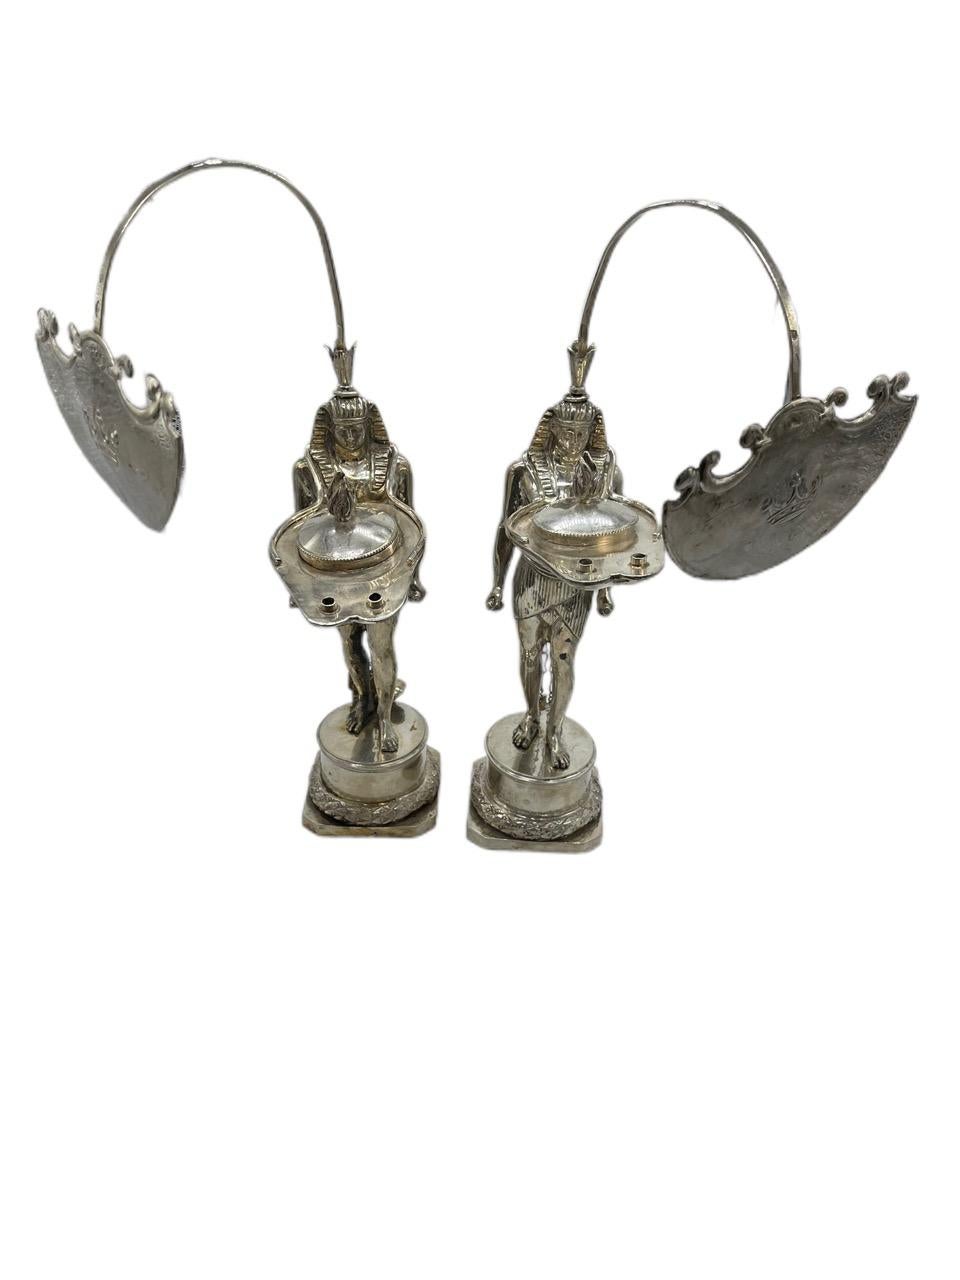 Pair of Early 19th Century Italian Antique Silver Oil Lamps by Vincenzo Belli II For Sale 7